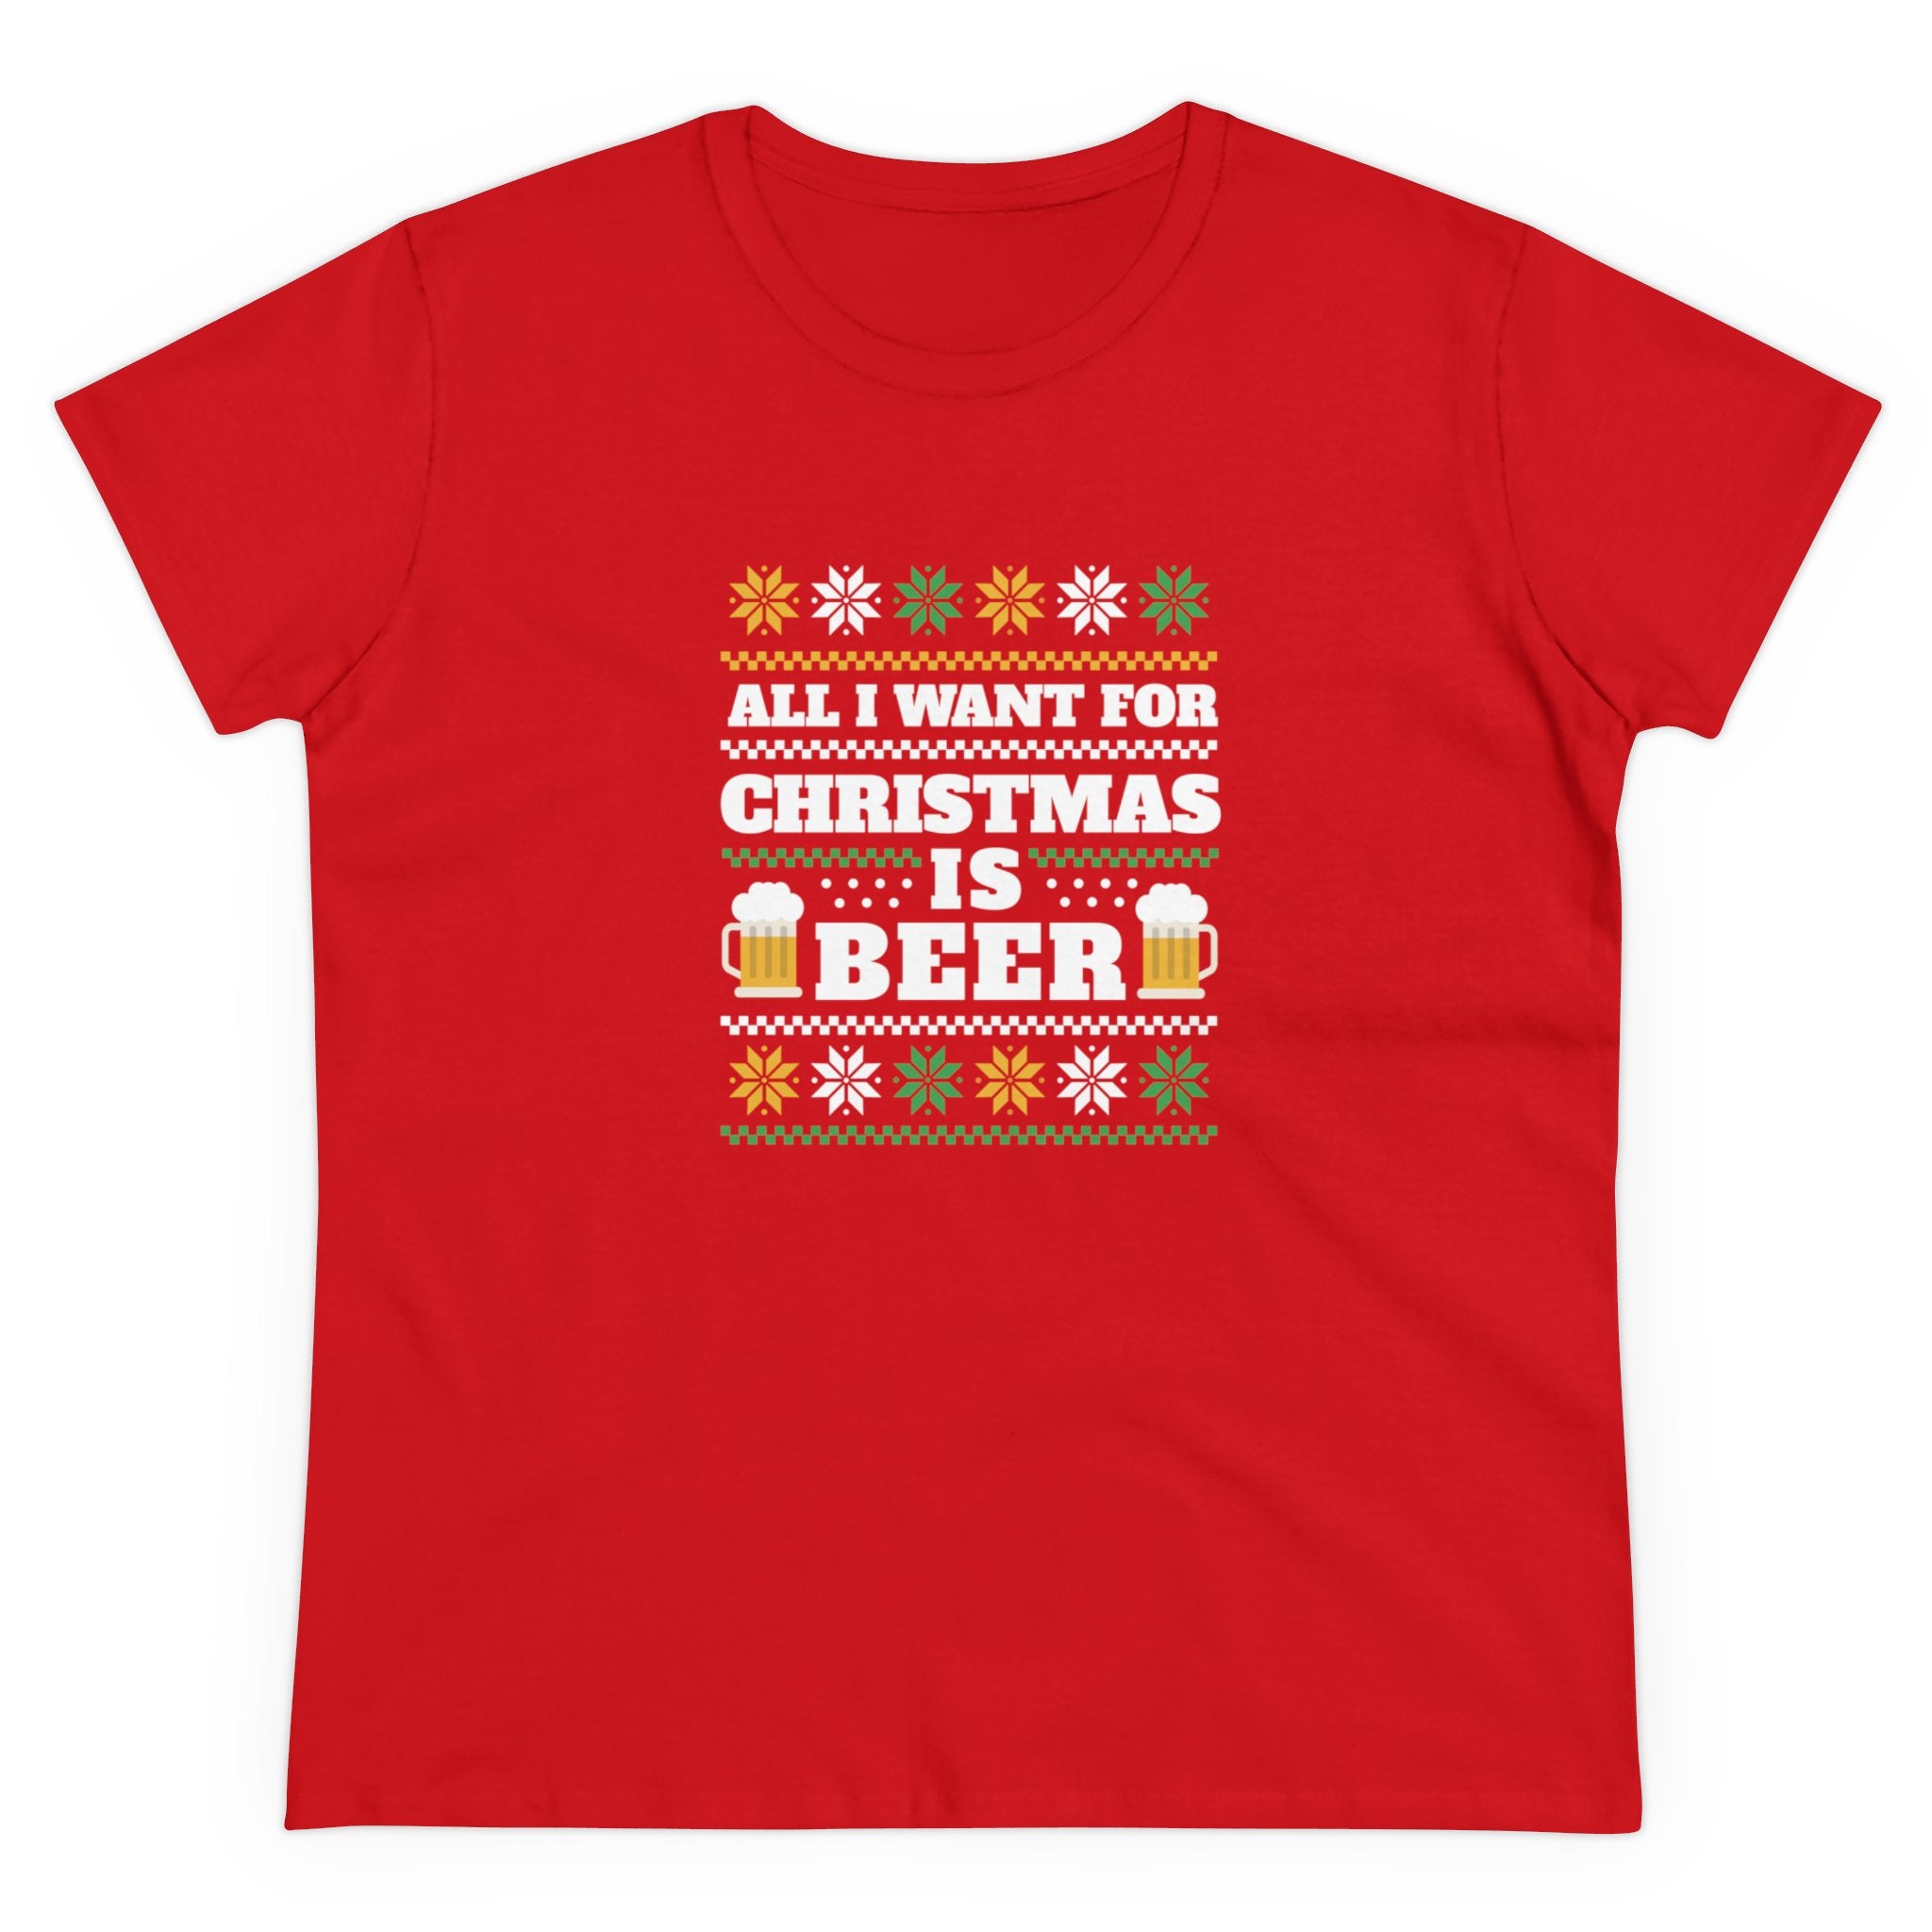 Beer Ugly Sweater - Women's Tee with a festive beer-themed design and the text "All I Want for Christmas is Beer," made from soft, pre-shrunk cotton, capturing the spirit of a Beer Ugly Sweater.